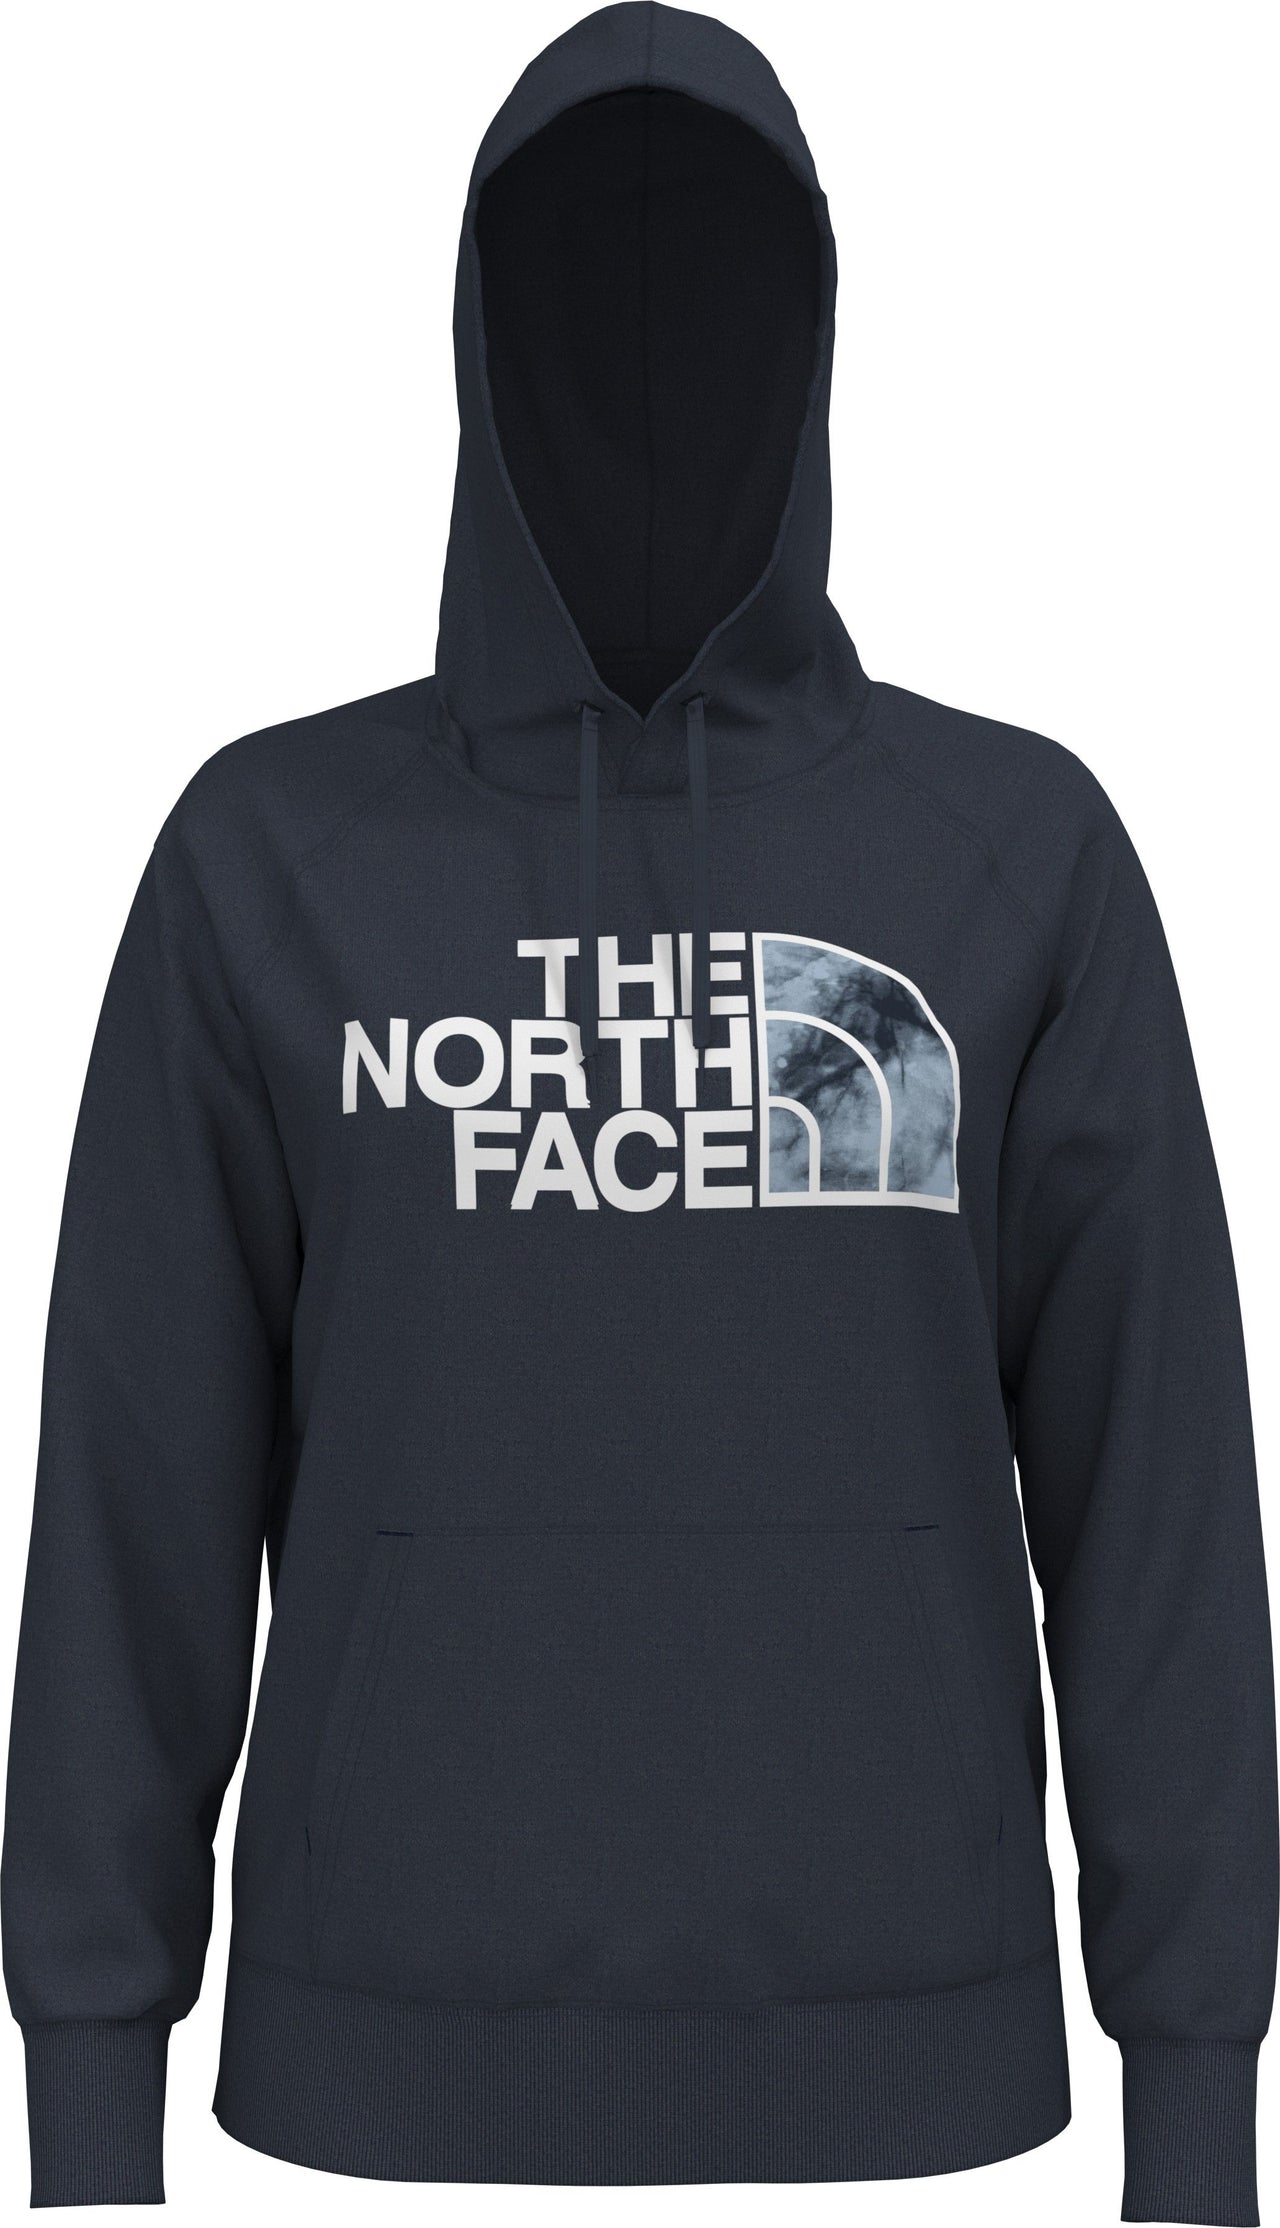 The North Face Apparel Women's Half Dome Pullover Hoodie Aviator Navy/beta Blue